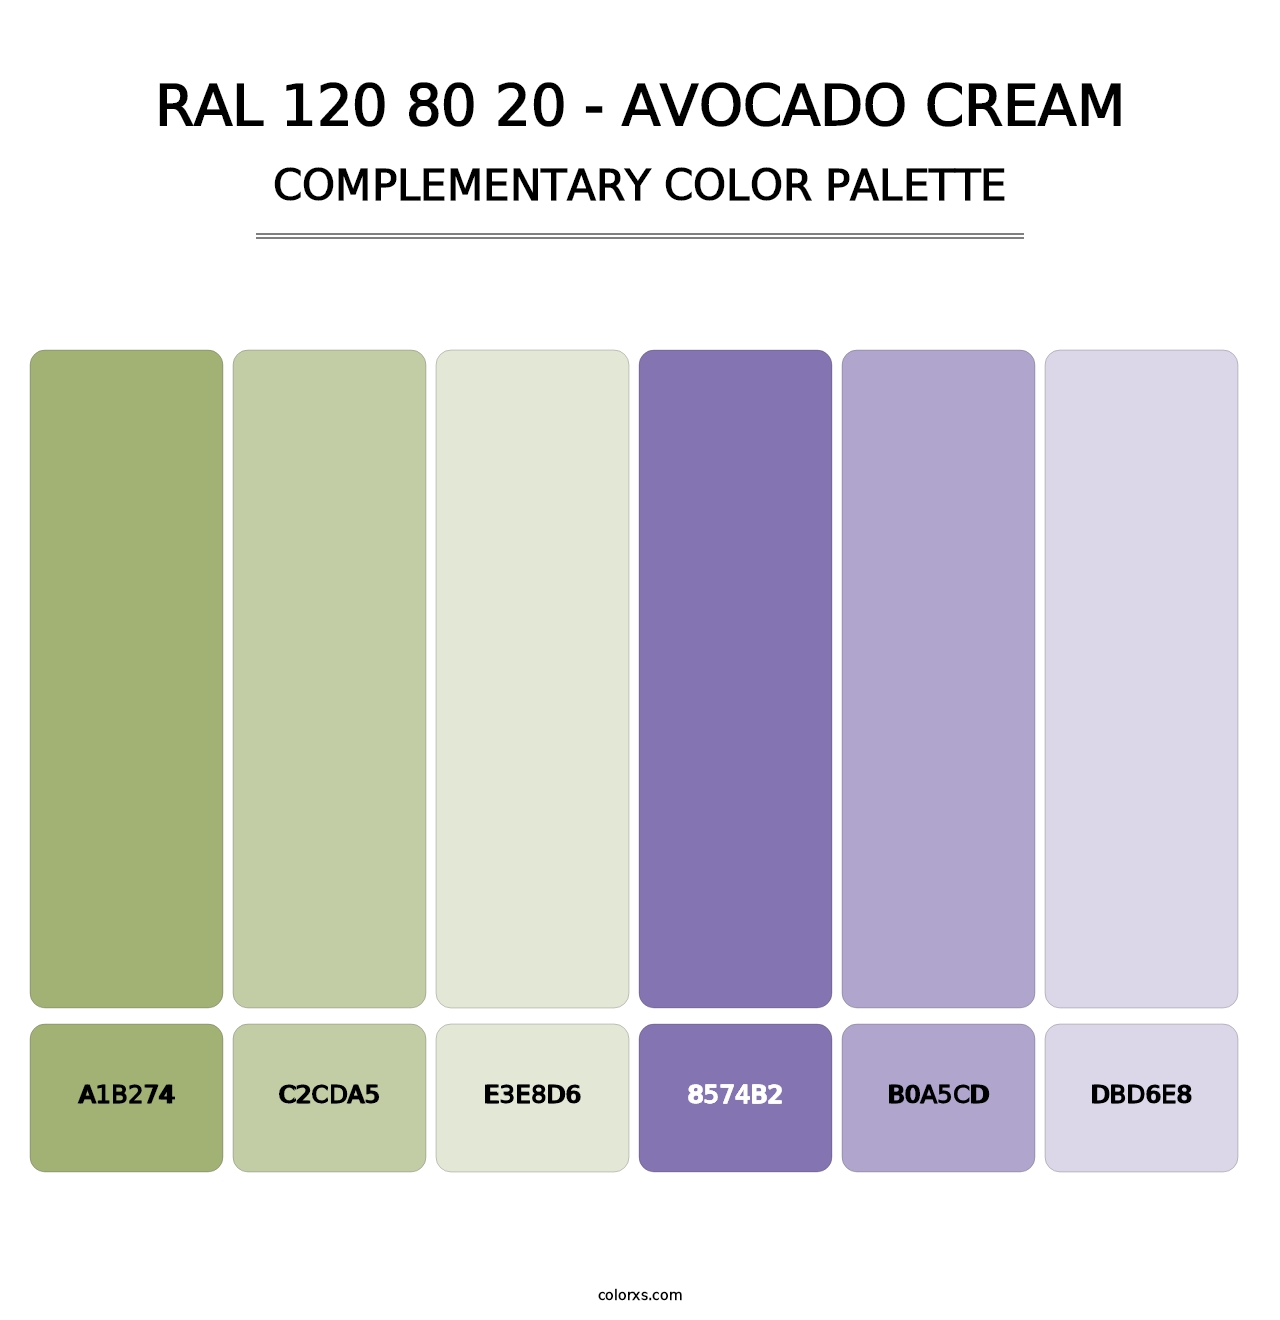 RAL 120 80 20 - Avocado Cream - Complementary Color Palette